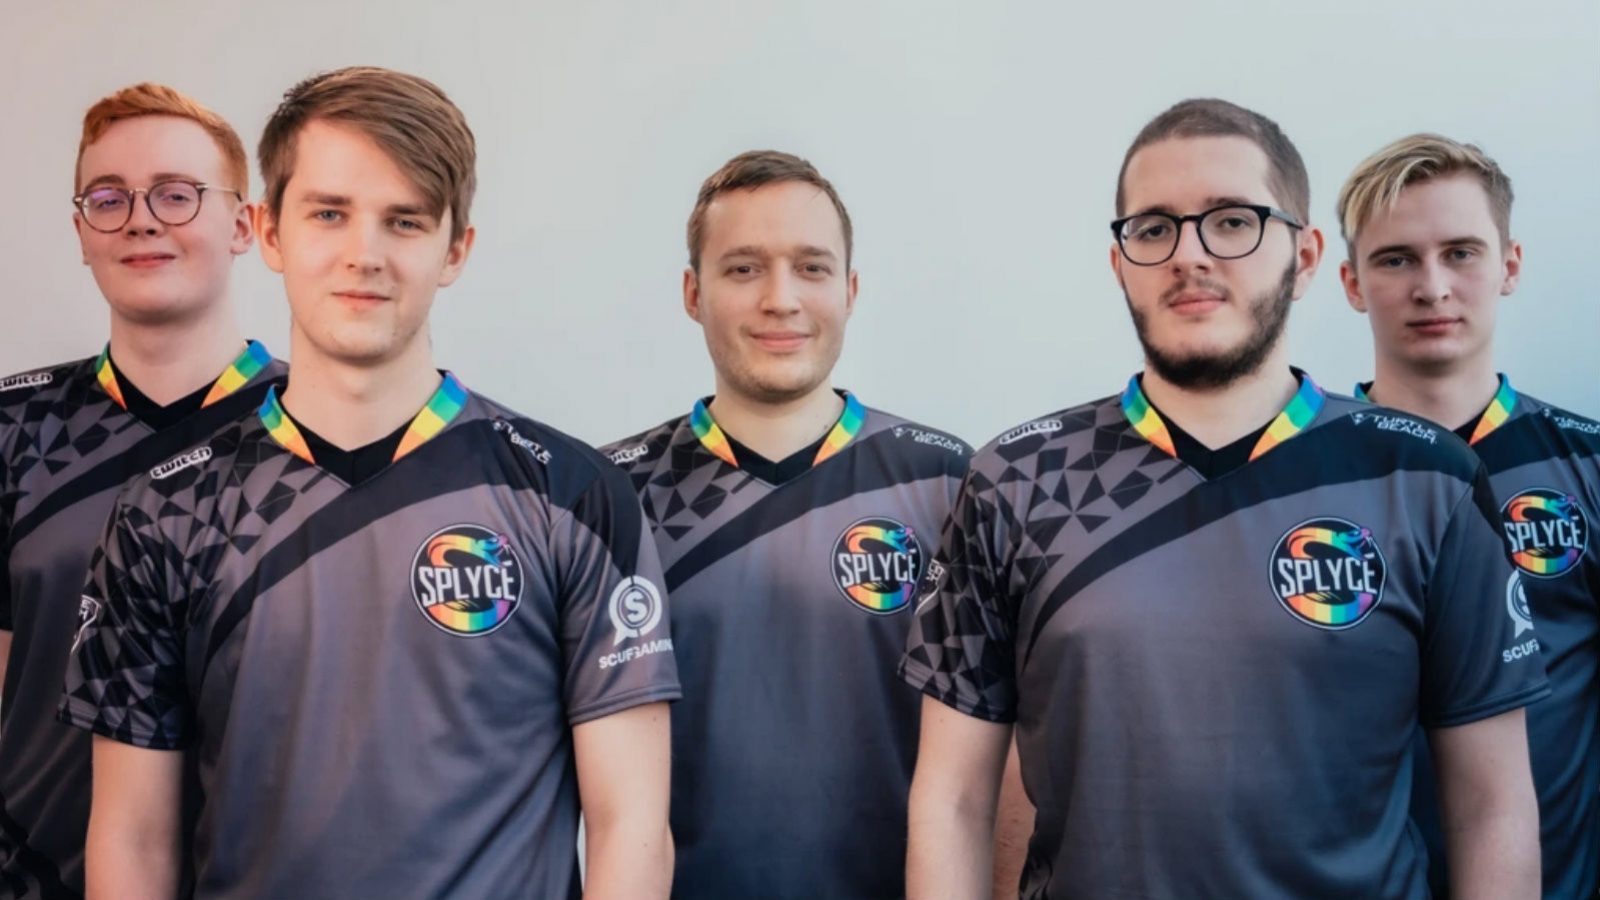 Polering delikatesse hav det sjovt Splyce to become the first ever League of Legends team to wear Pride jerseys  on stage - Dexerto